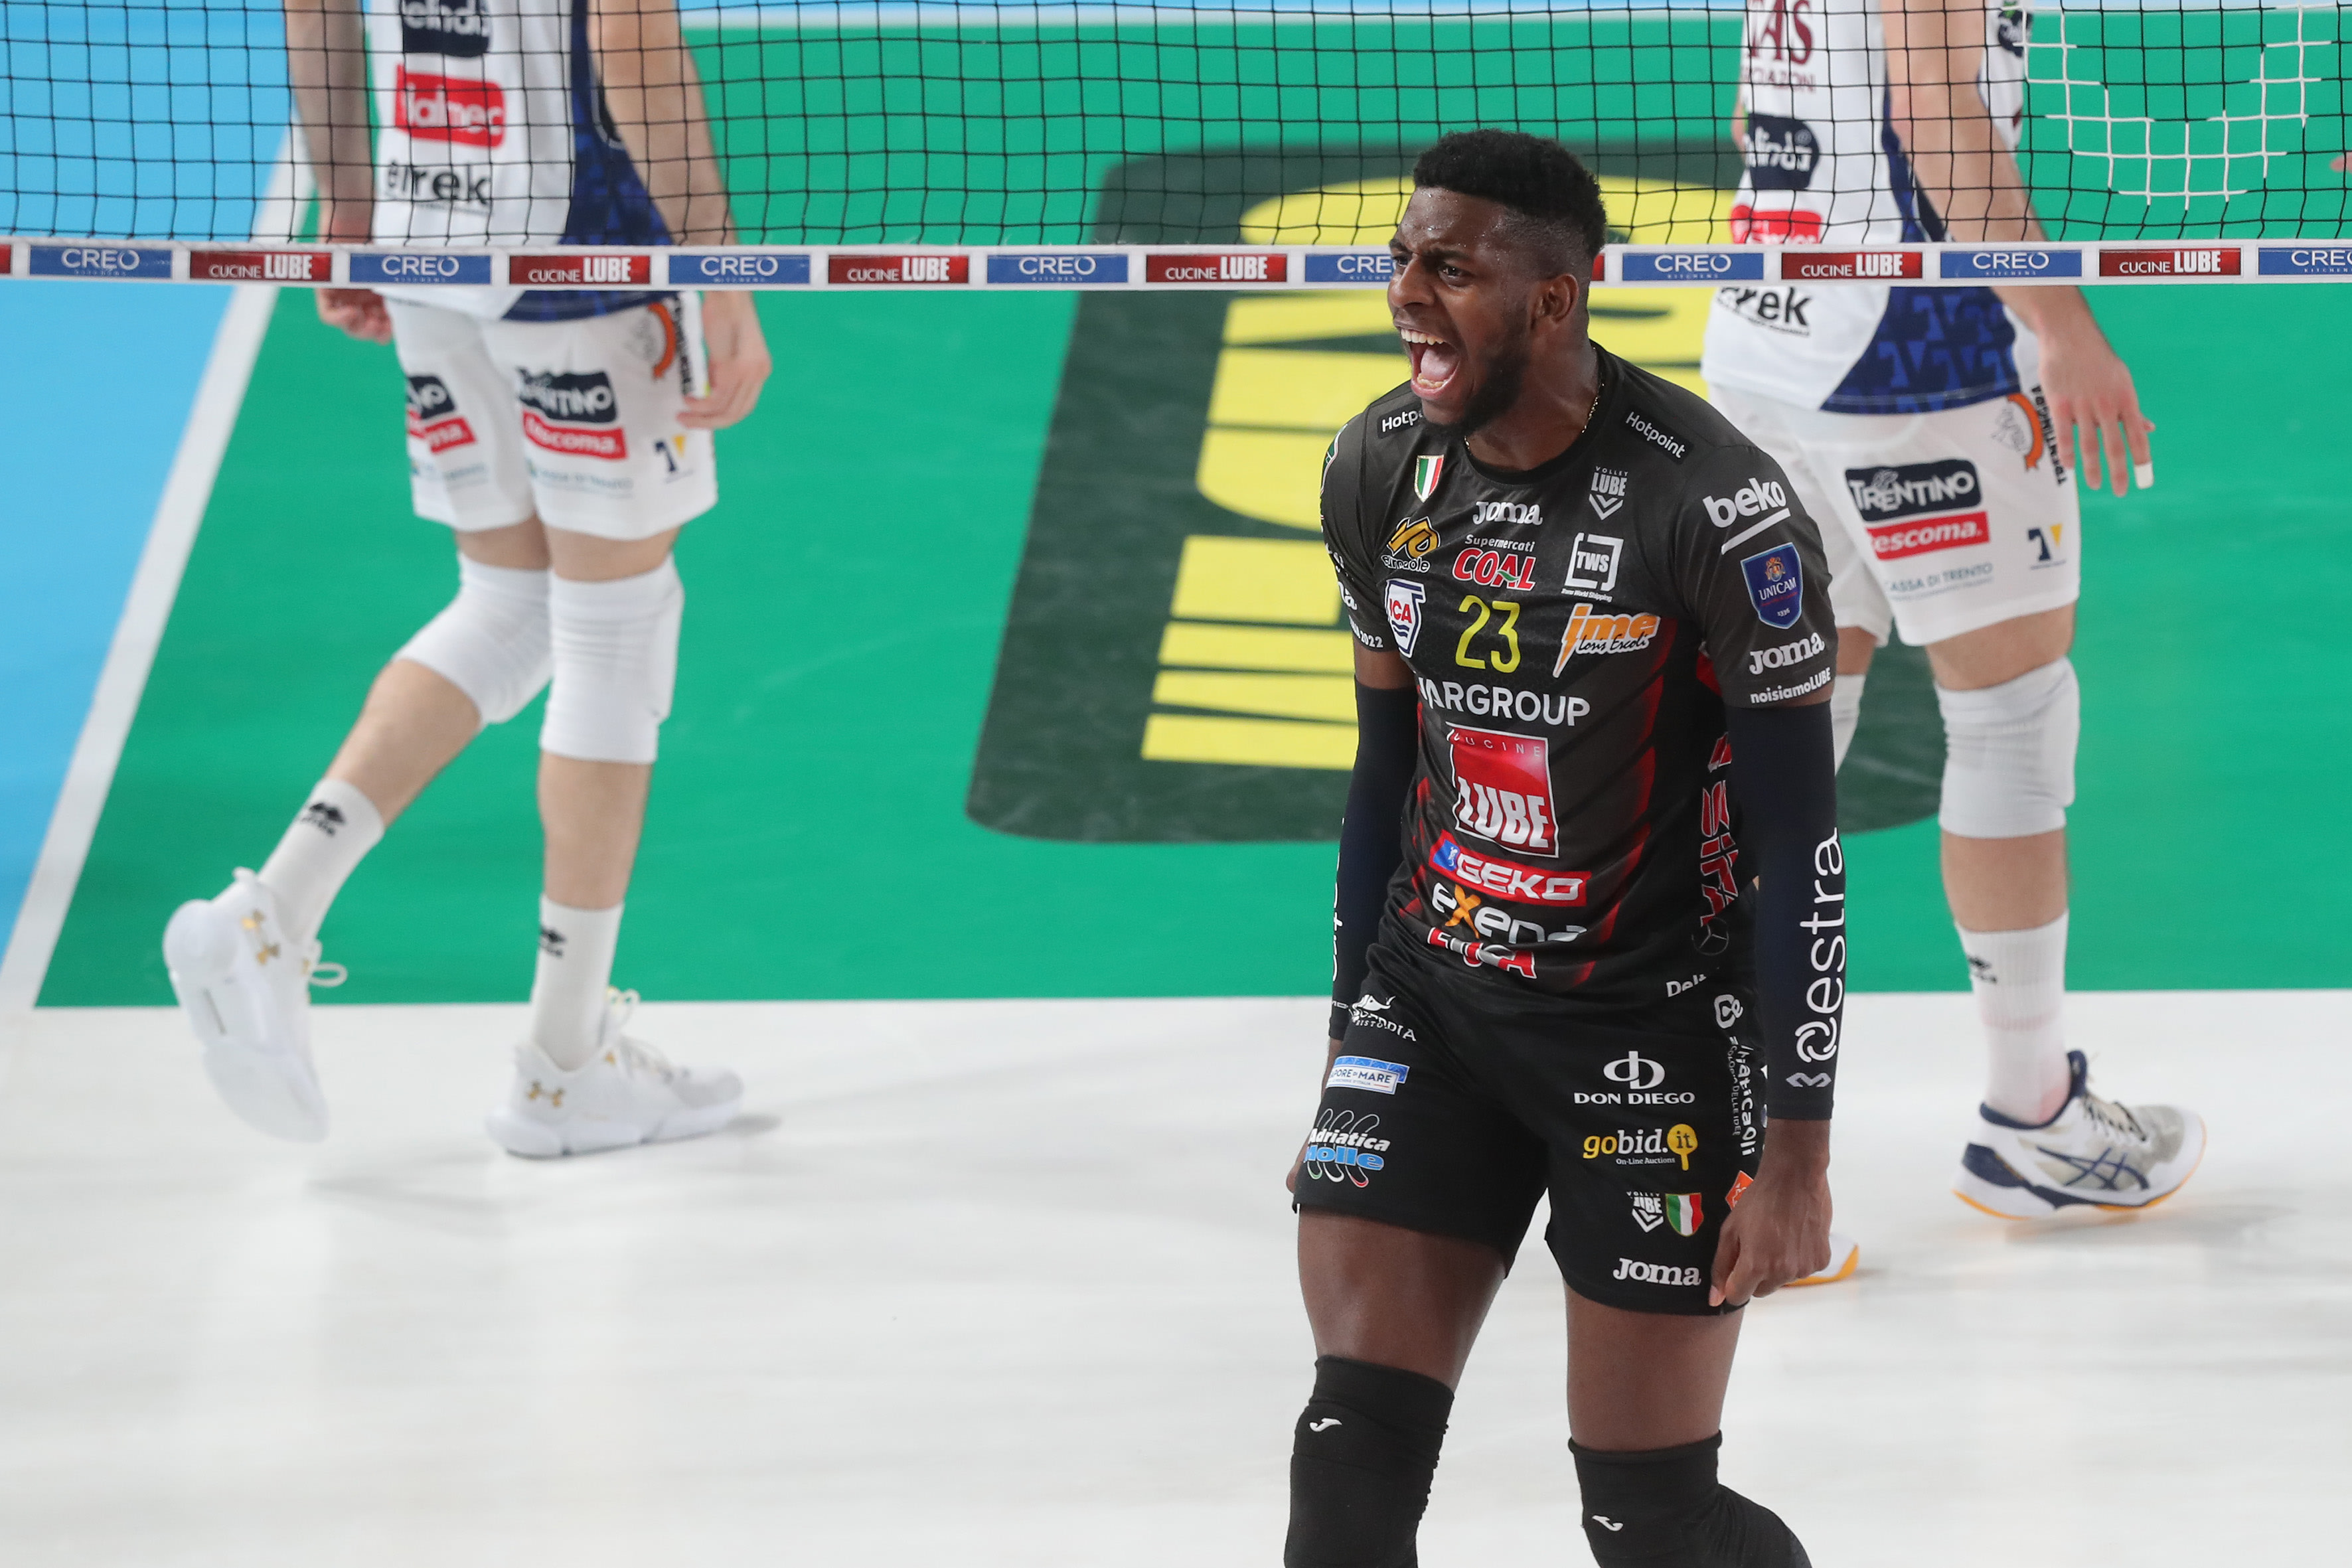 Yant fires seven aces as Lube push SuperLega Finals to match five volleyballworld